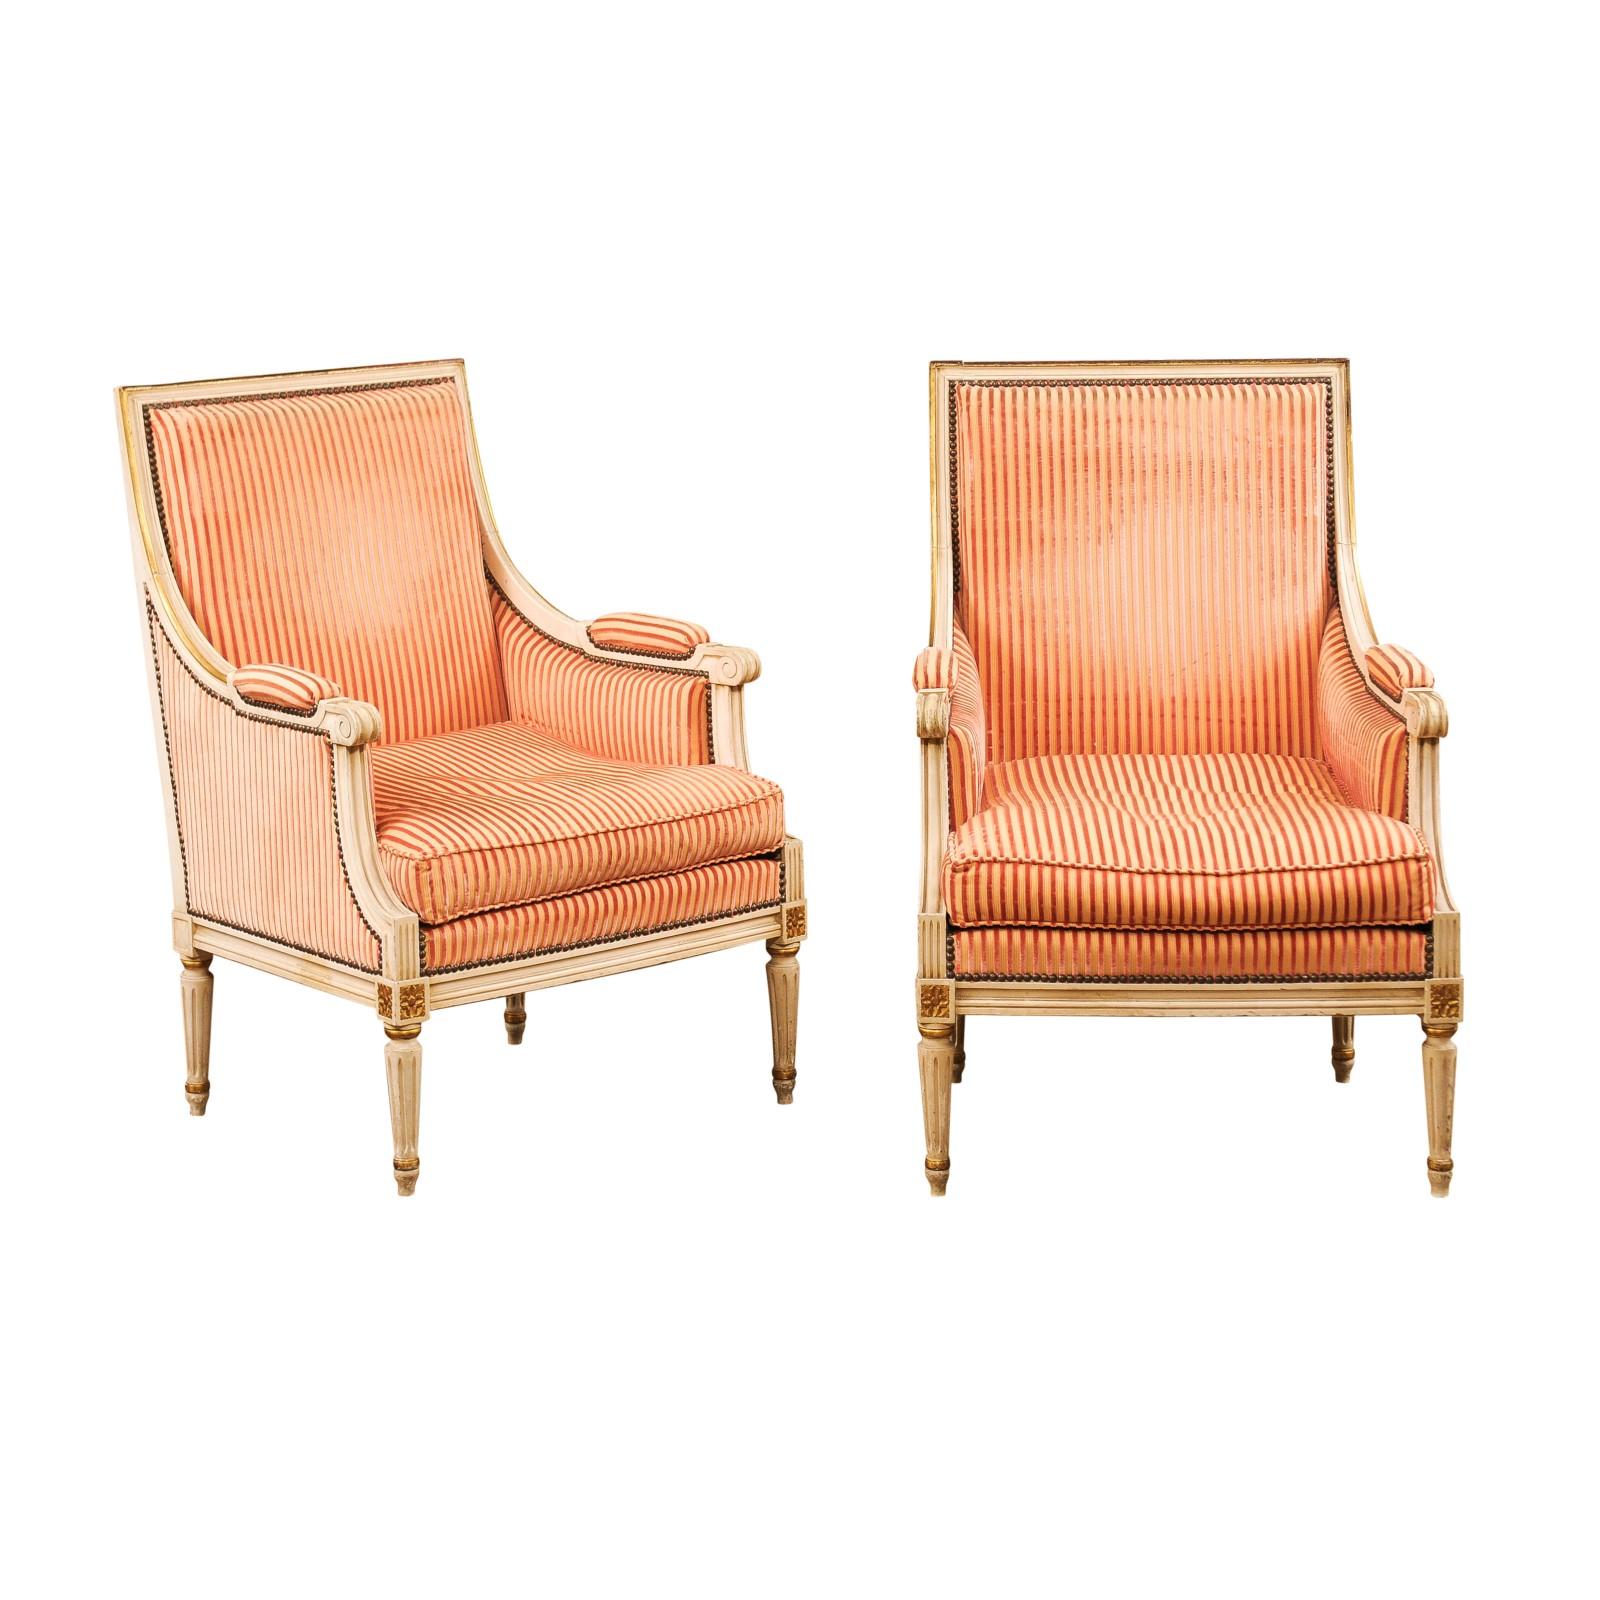 A pair of French Louis XVI style painted wood bergères à la Reine chairs from the early 20th century, with carved rosettes, gilded details and old upholstery. Created in France at the Turn of the Century which saw the transition between the 19th to